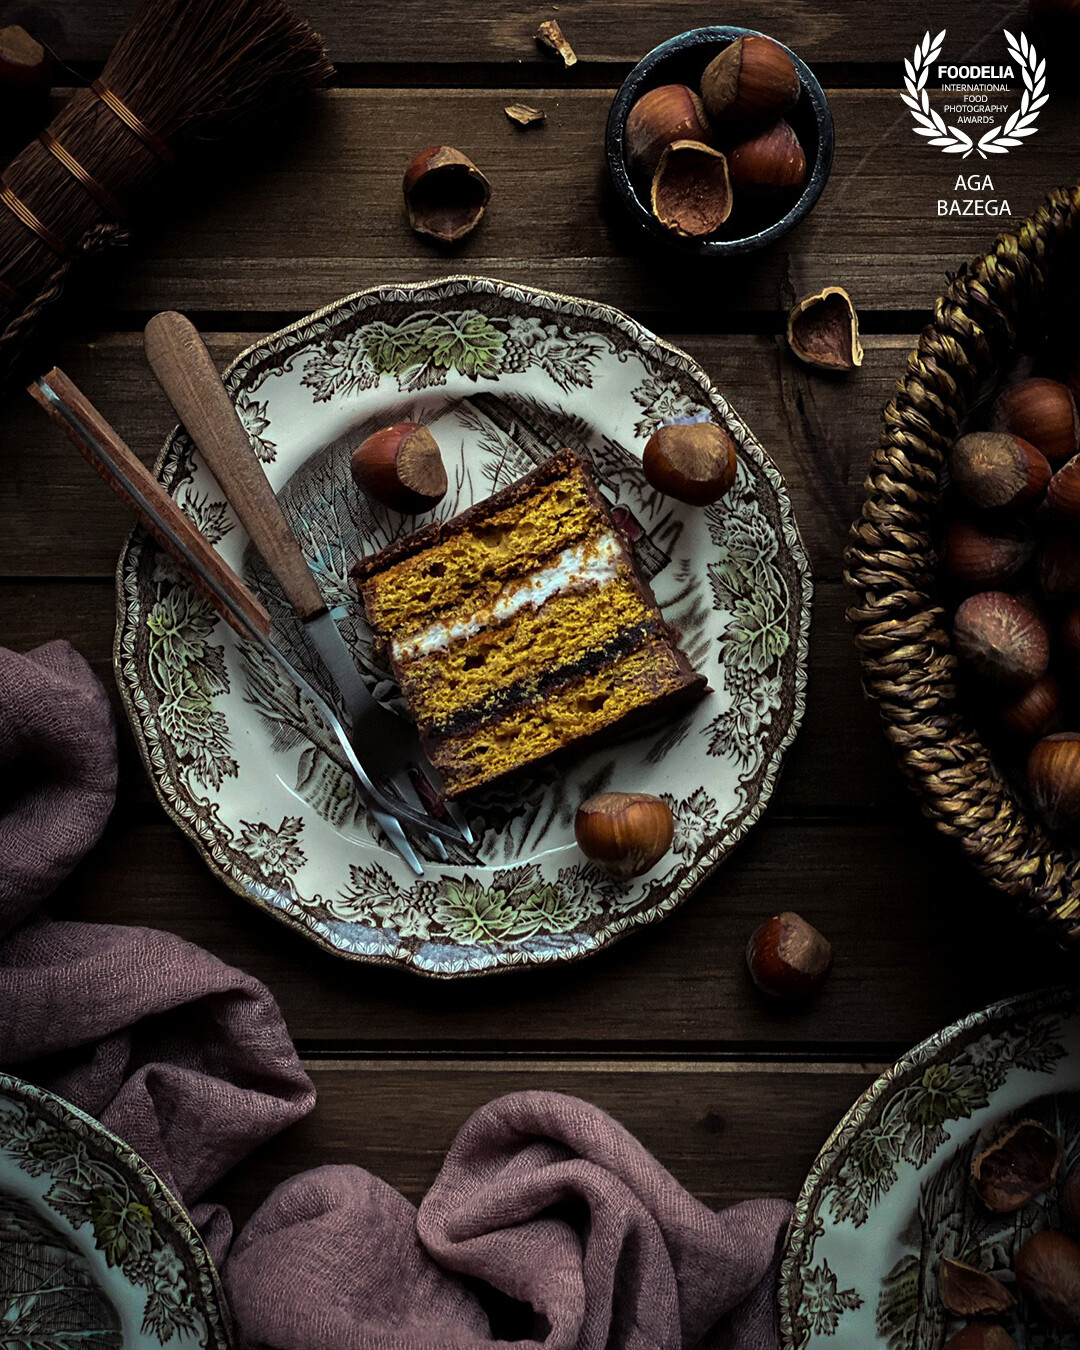 Cake with hazelnut filling. Image created for a photography contest. Captured in my studio with natural light.